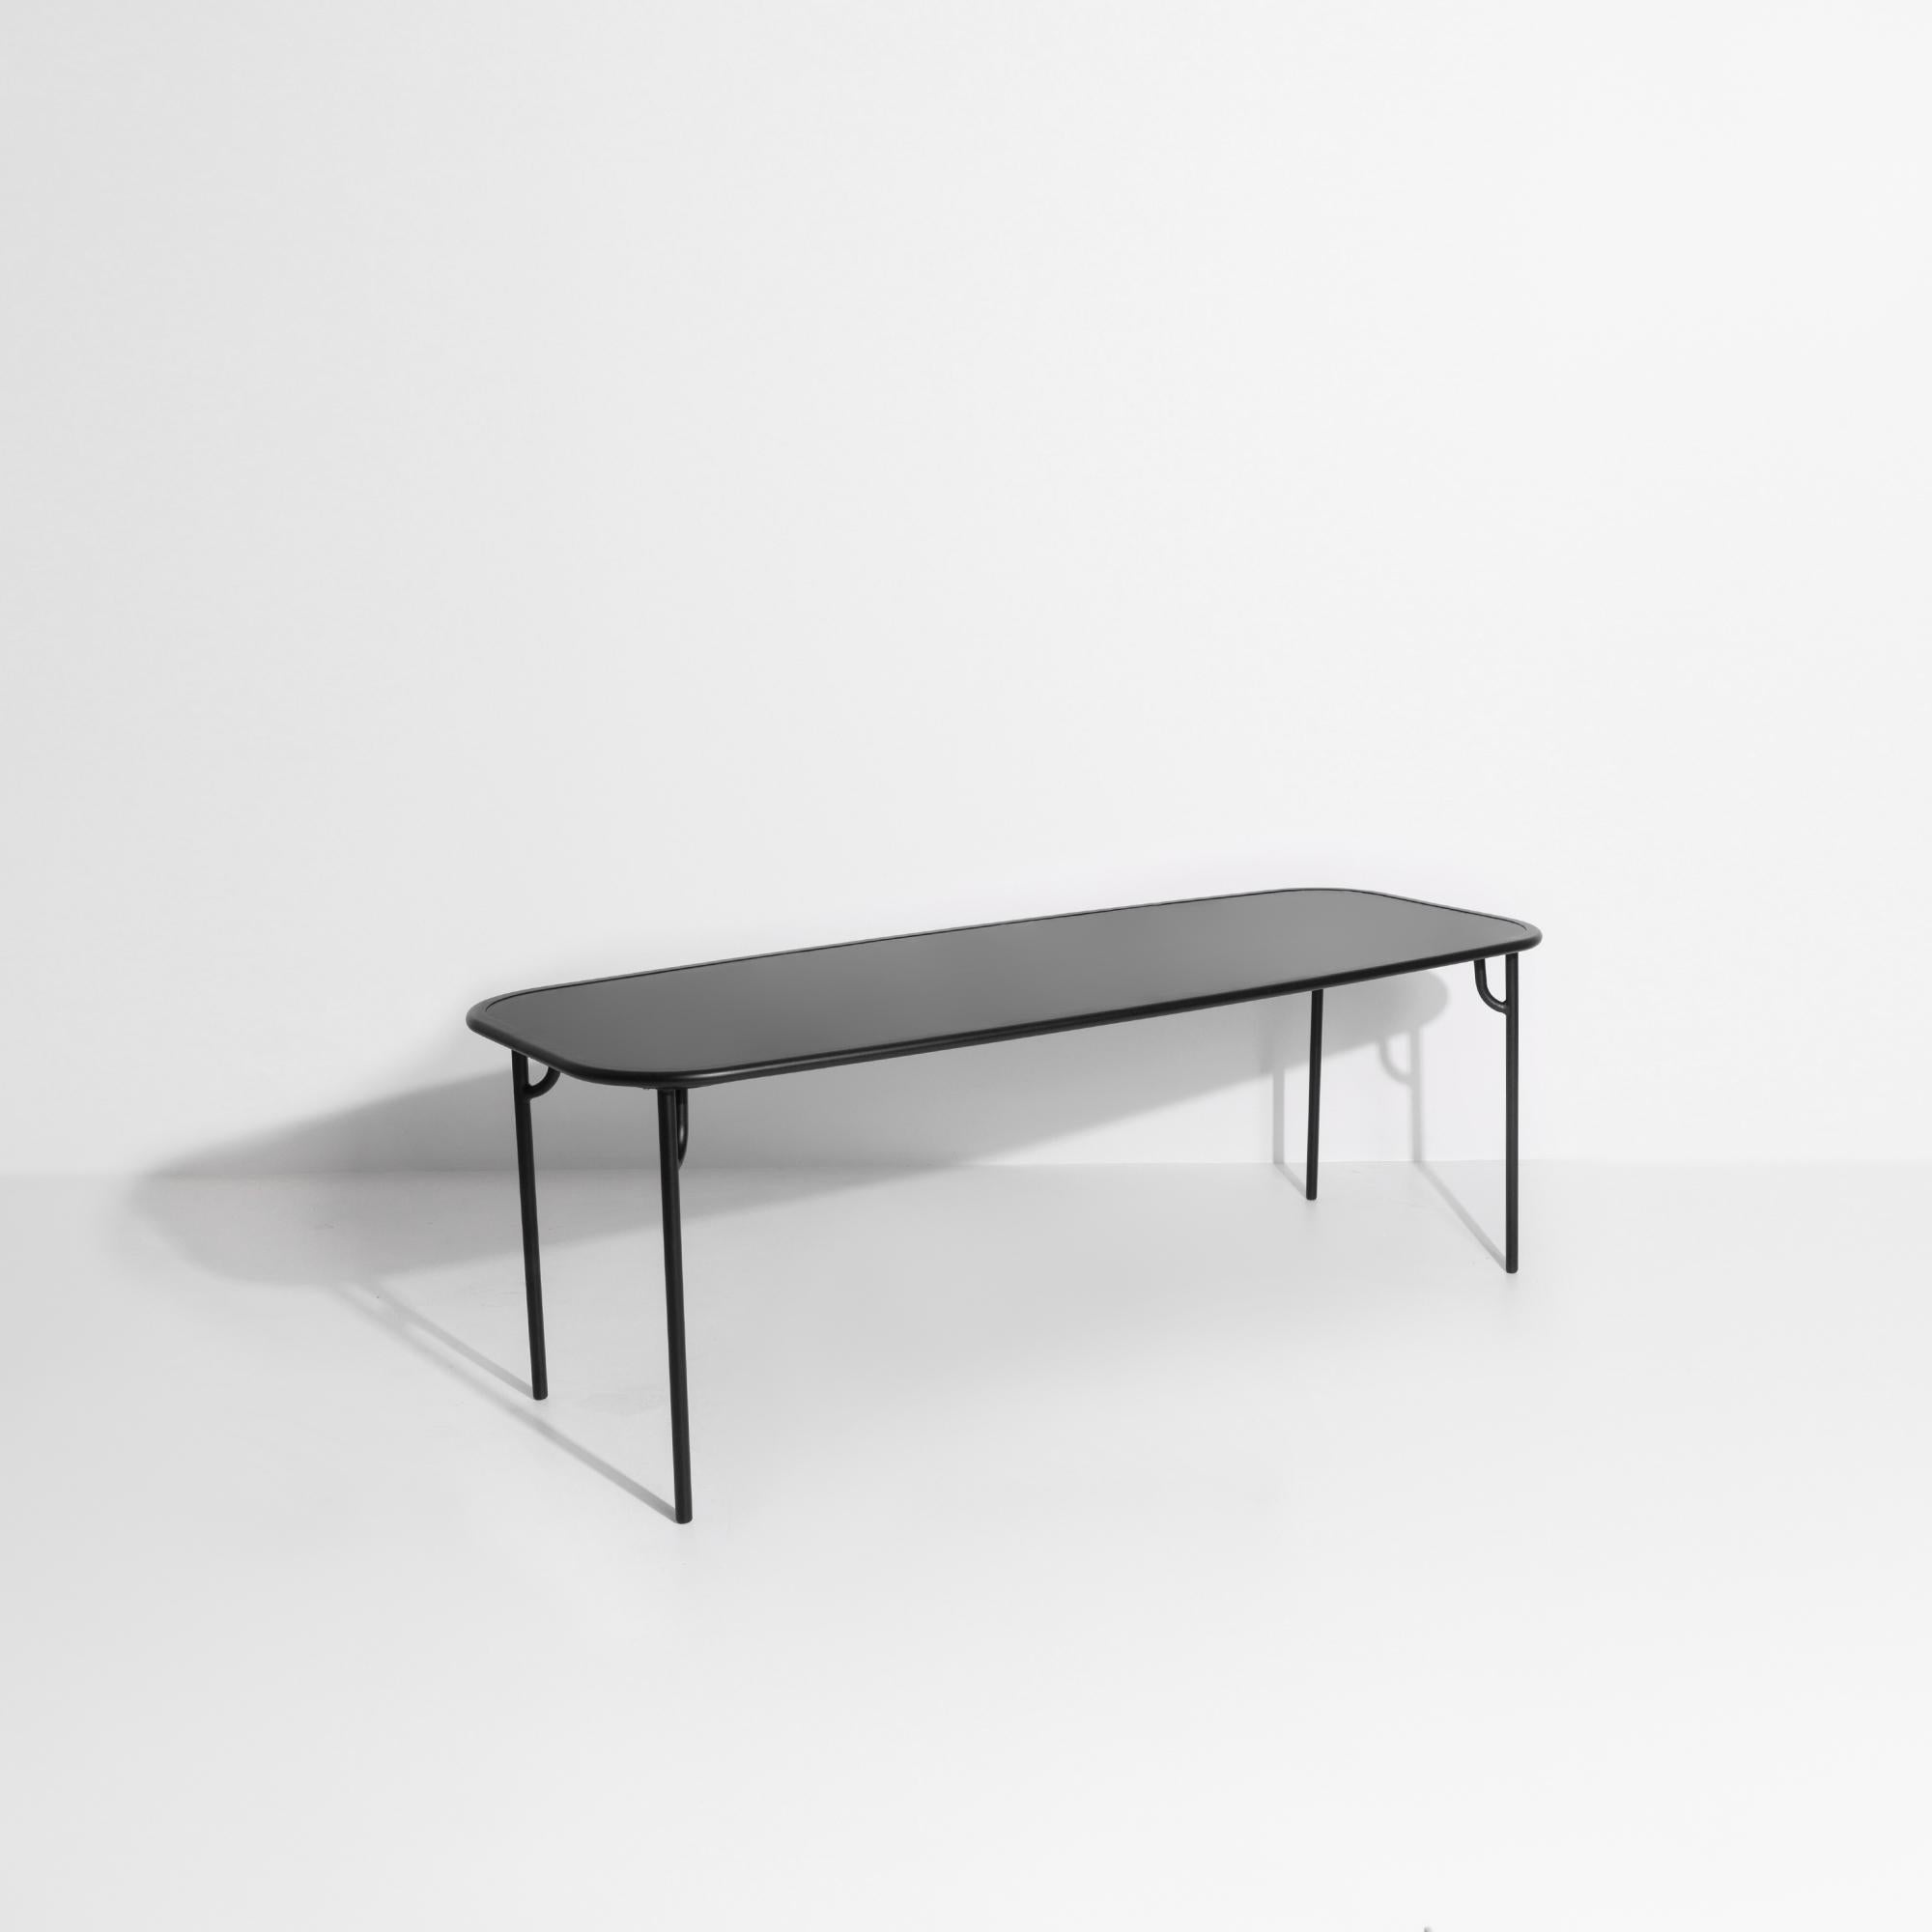 Contemporary Petite Friture Week-End Large Plain Rectangular Dining Table in Black Aluminium For Sale